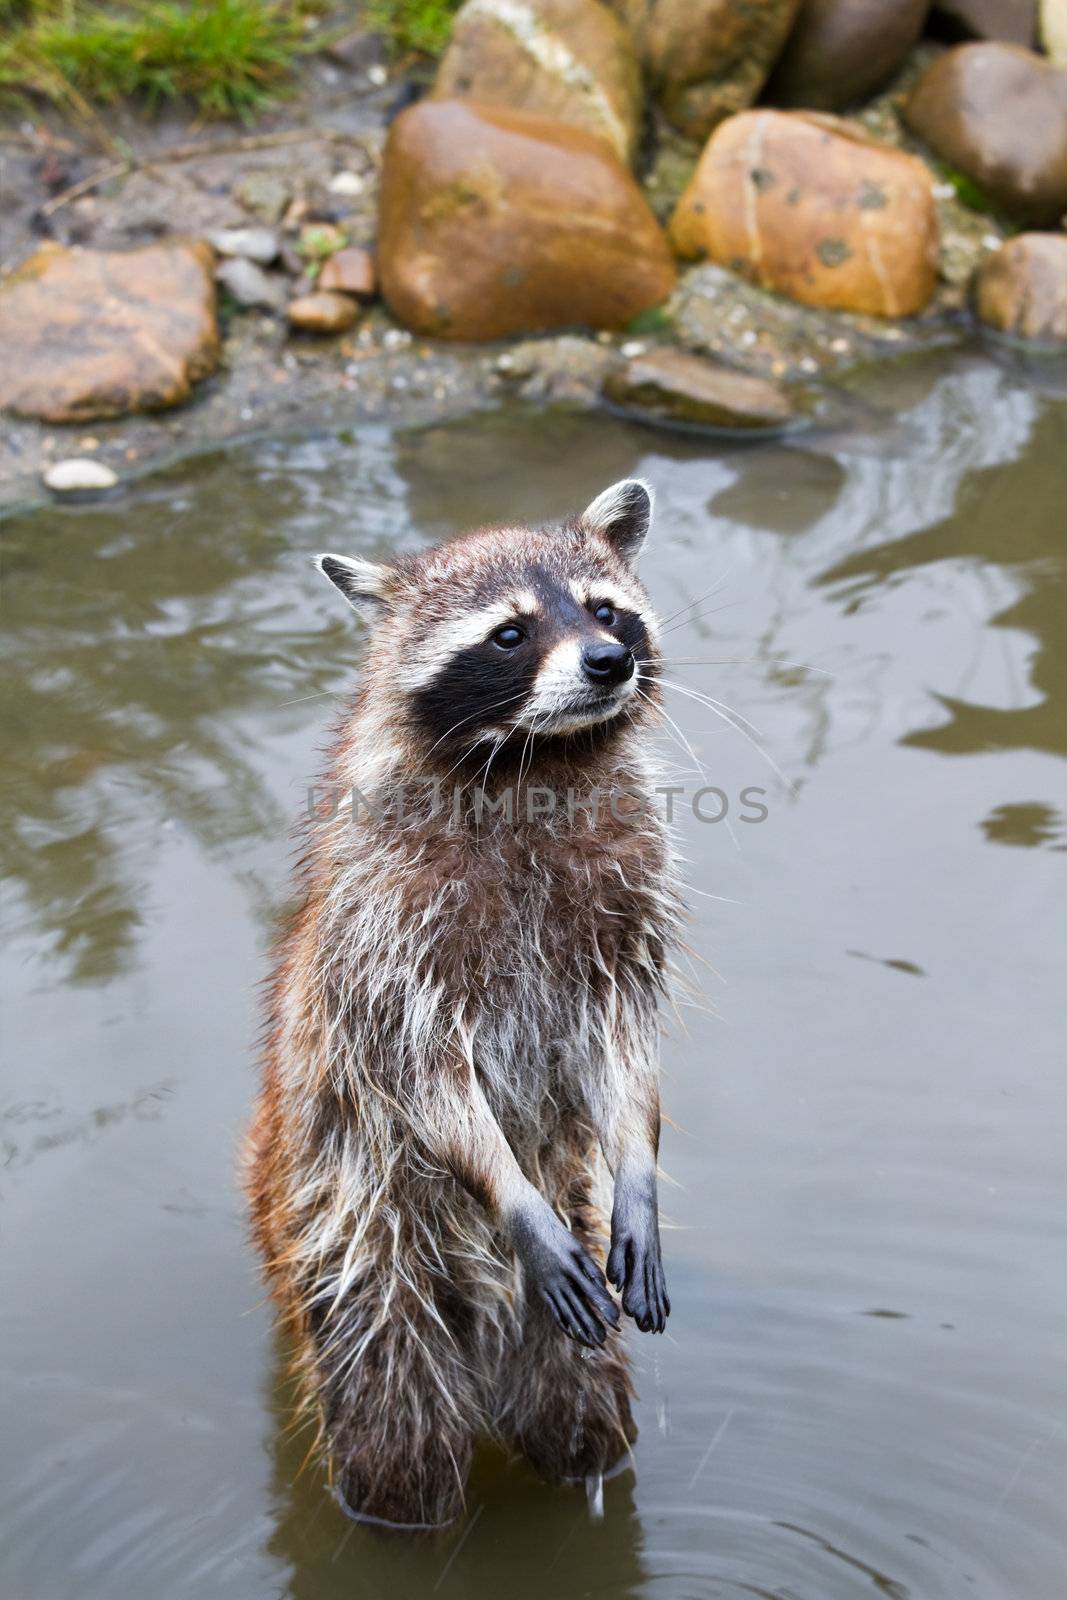 Common raccoon or Procyon lotor standing in water